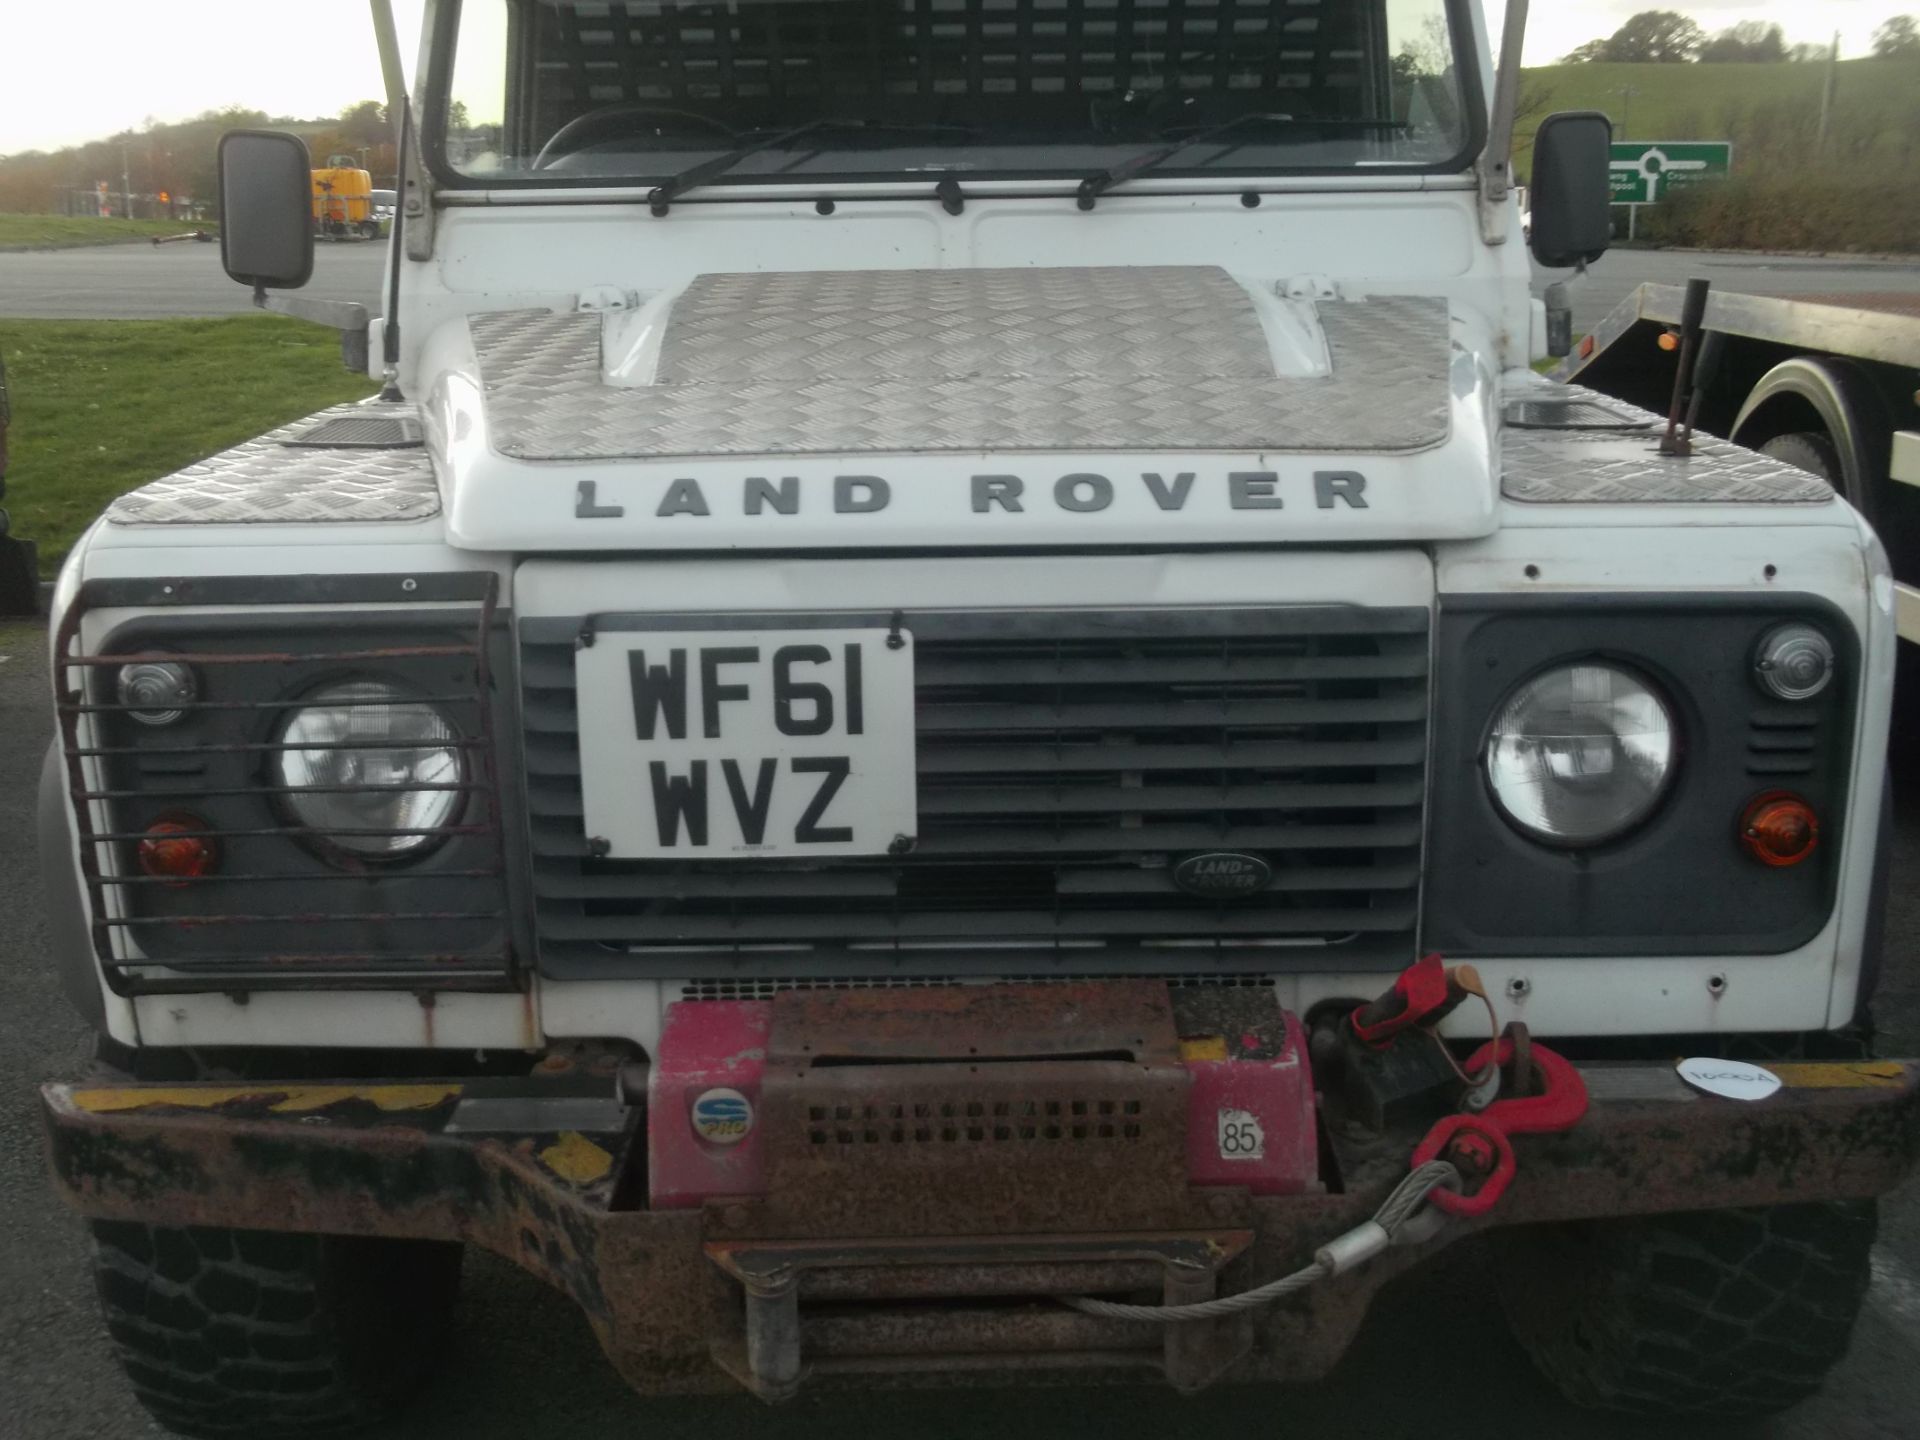 LANDROVER 110 HARDTOP. 61 PLATE - Image 6 of 6